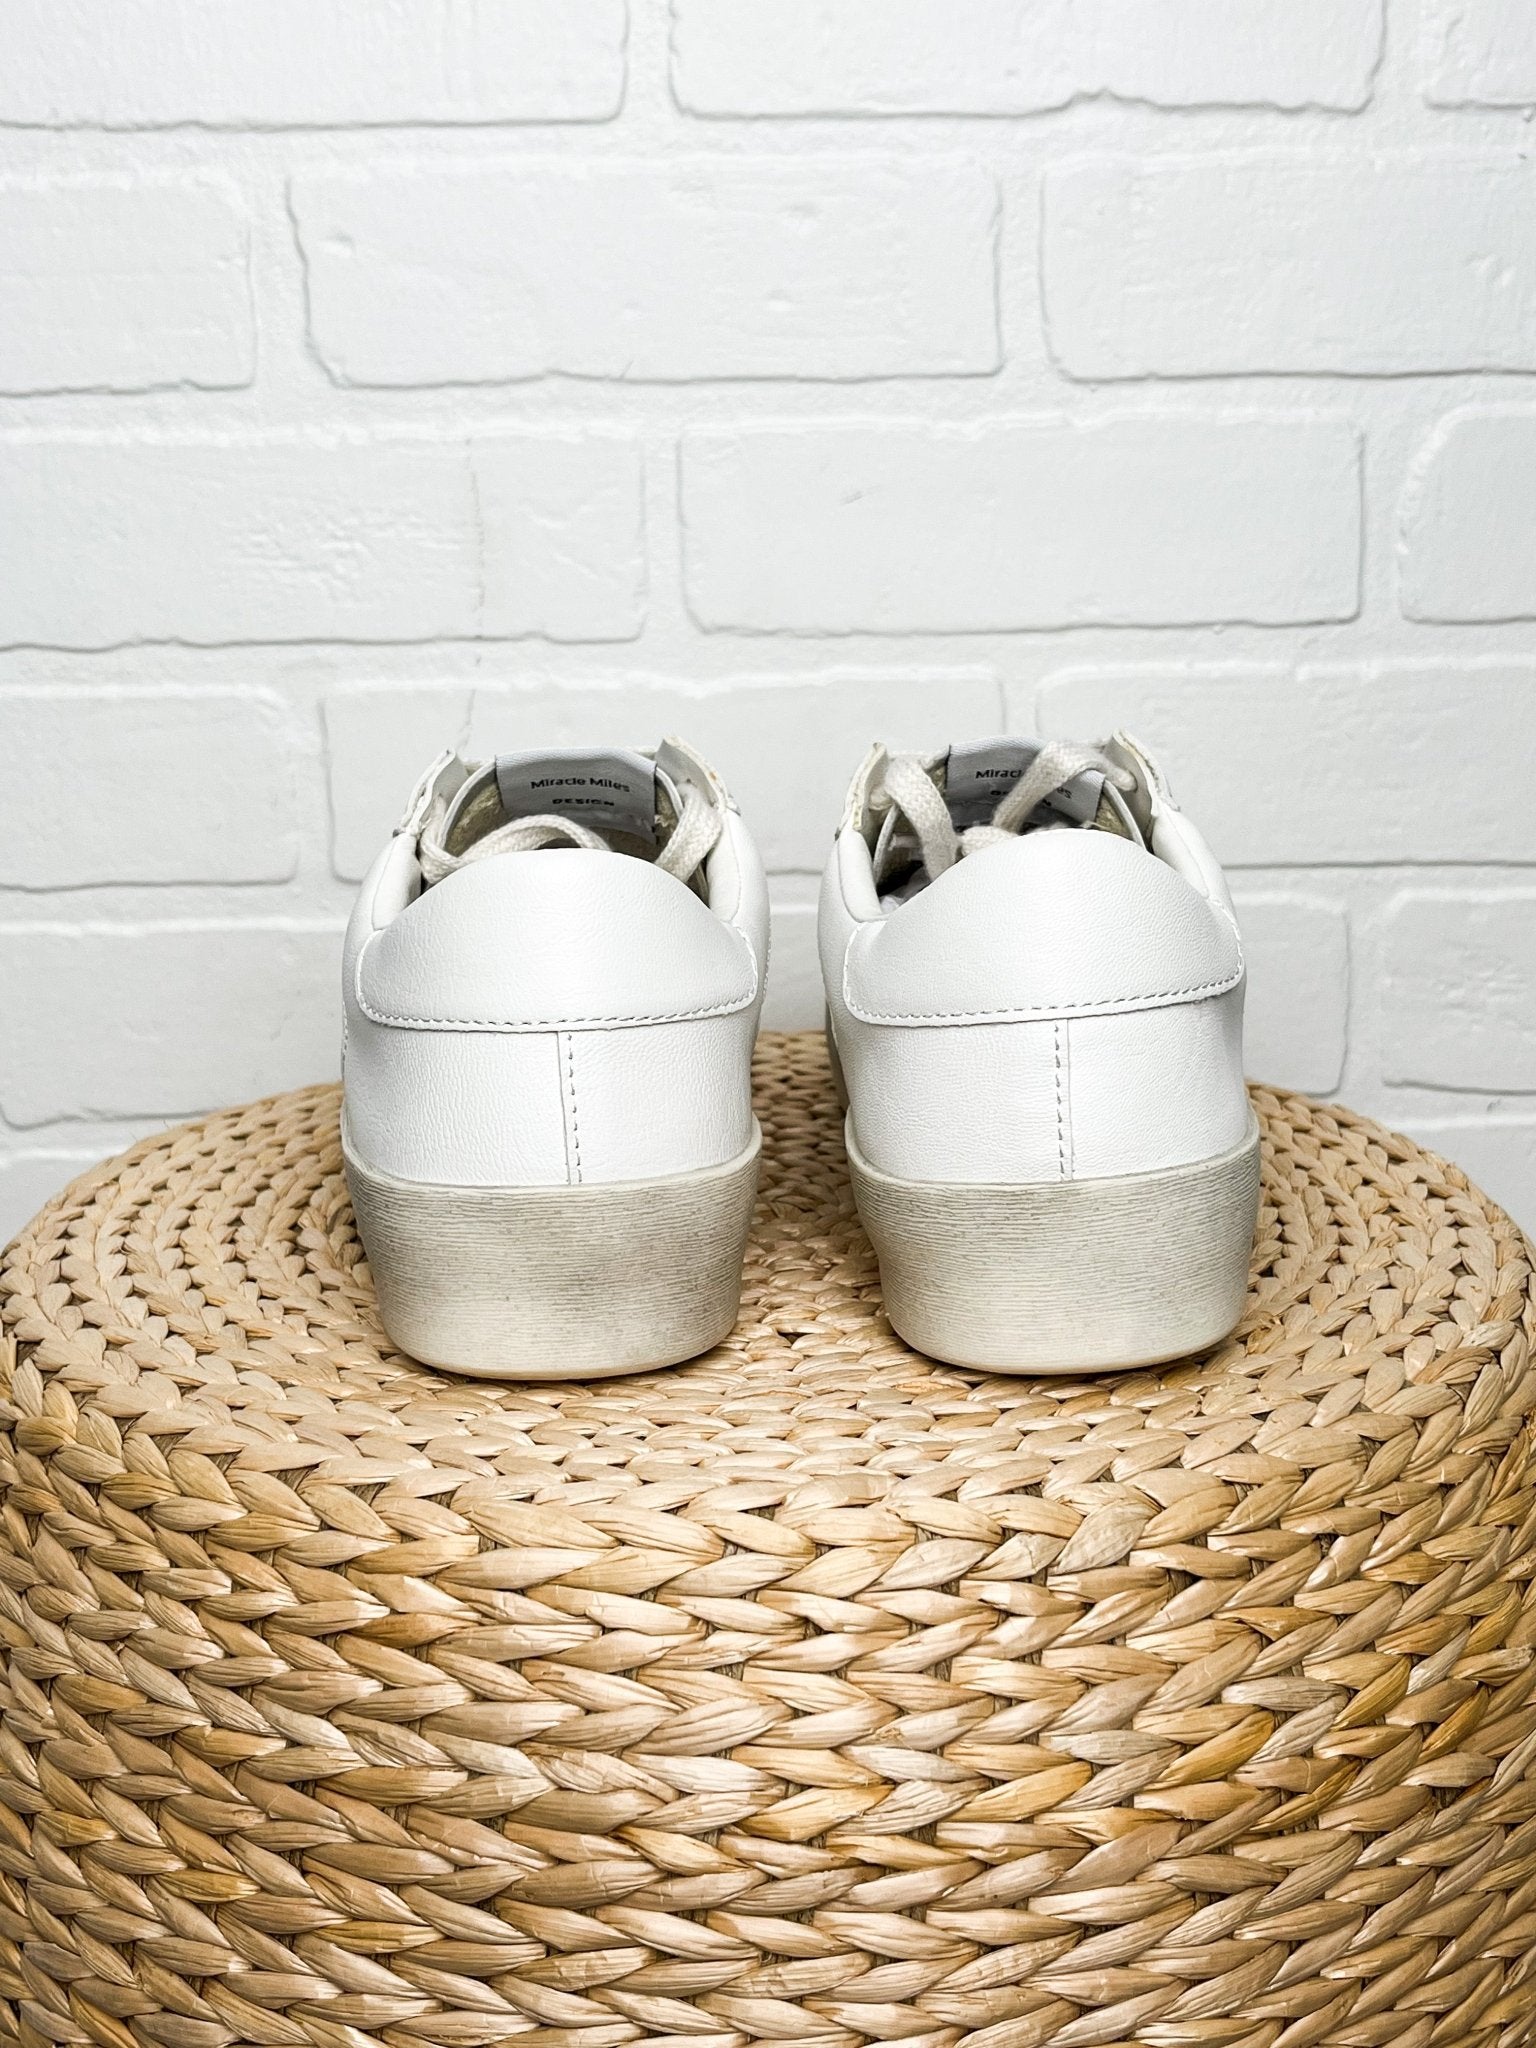 Alex star sneaker white Stylish Shoes - Womens Fashion Shoes at Lush Fashion Lounge Boutique in Oklahoma City